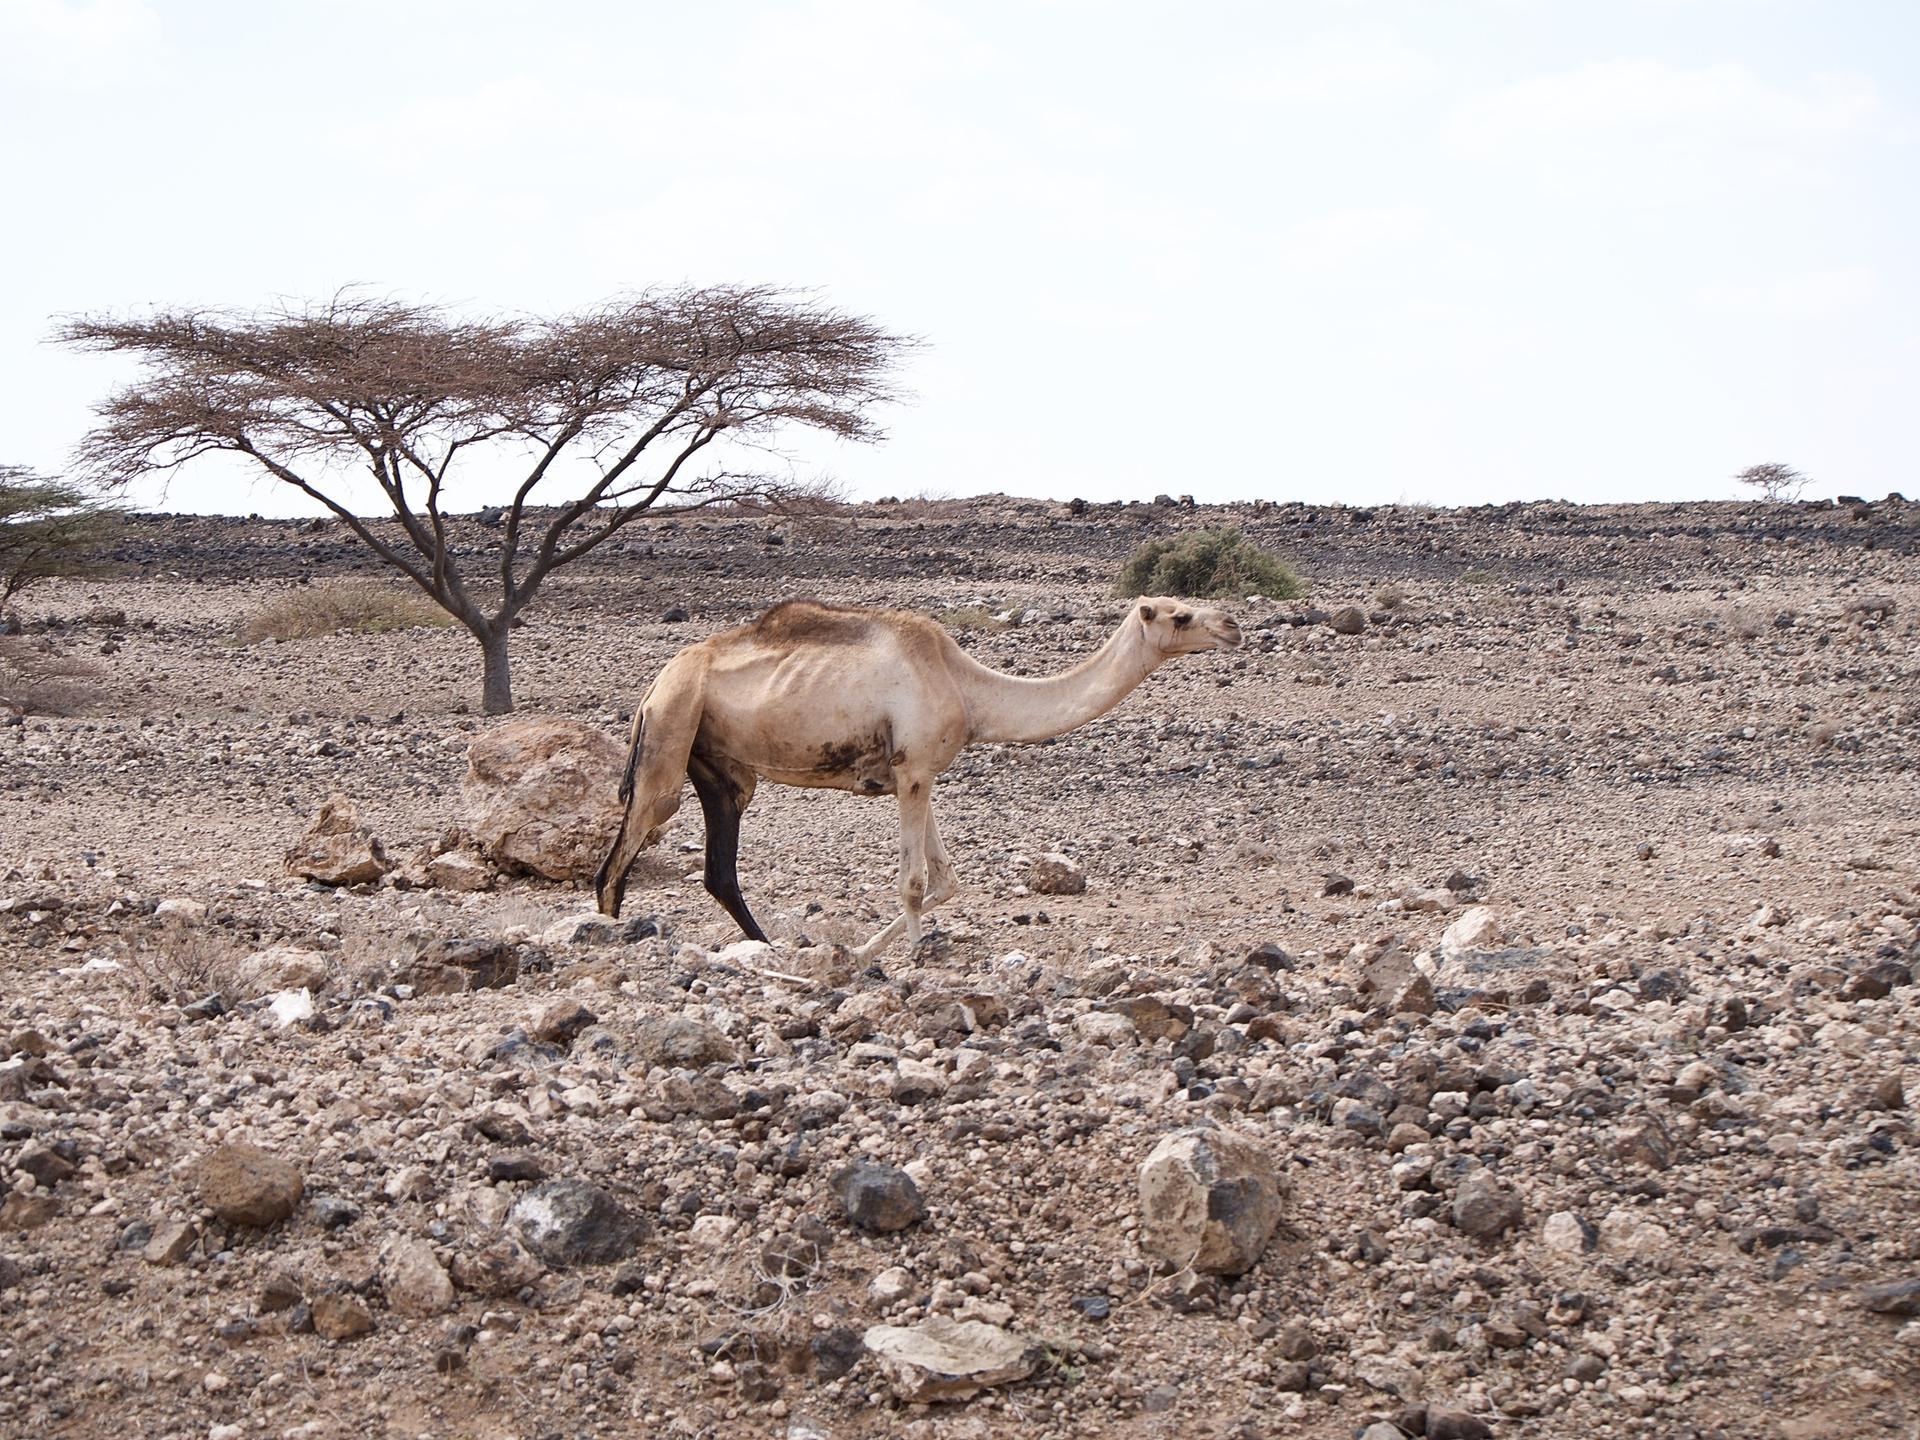 A thin, sickly camel trudges along in the heat in the drought-affected Marsabit County, Kenya, Nov. 3, 2021.